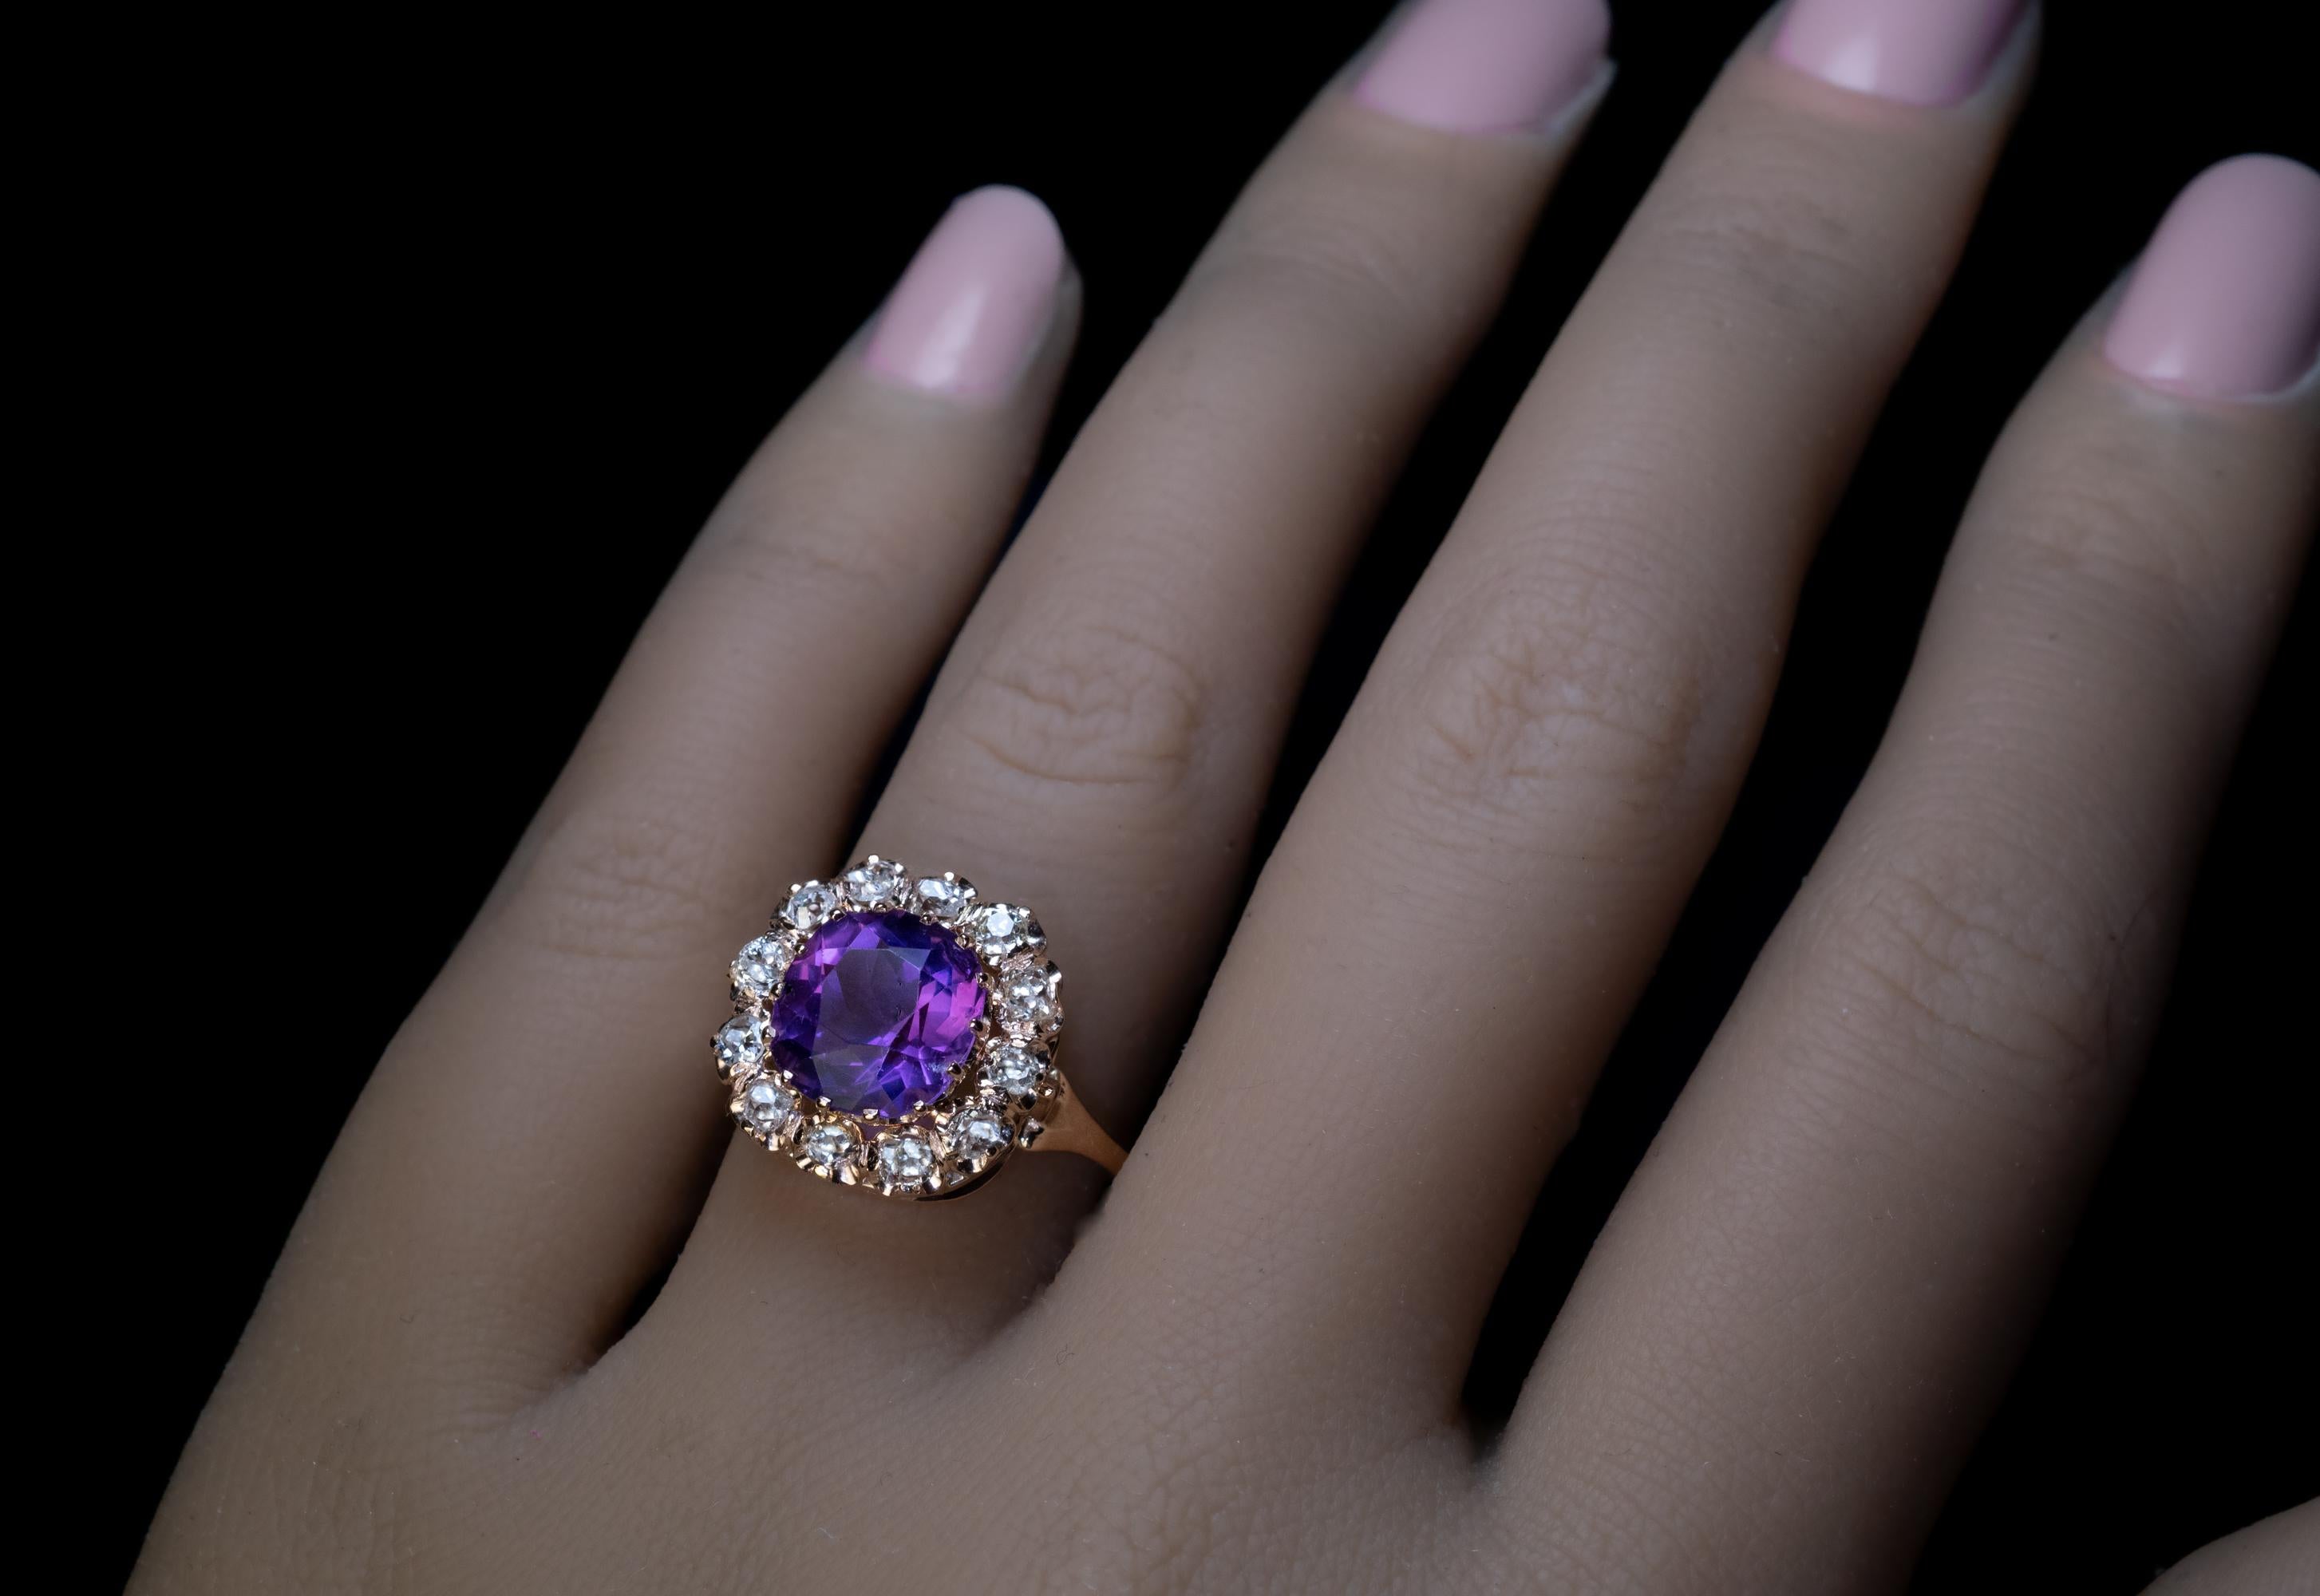 Russia, circa 1880s.
This antique 14K gold cluster ring features an old cushion cut Siberian amethyst of an excellent pinkish bluish purple color. The stone is full of life and very sparkly. It is framed by chunky old mine cut diamonds.
The amethyst